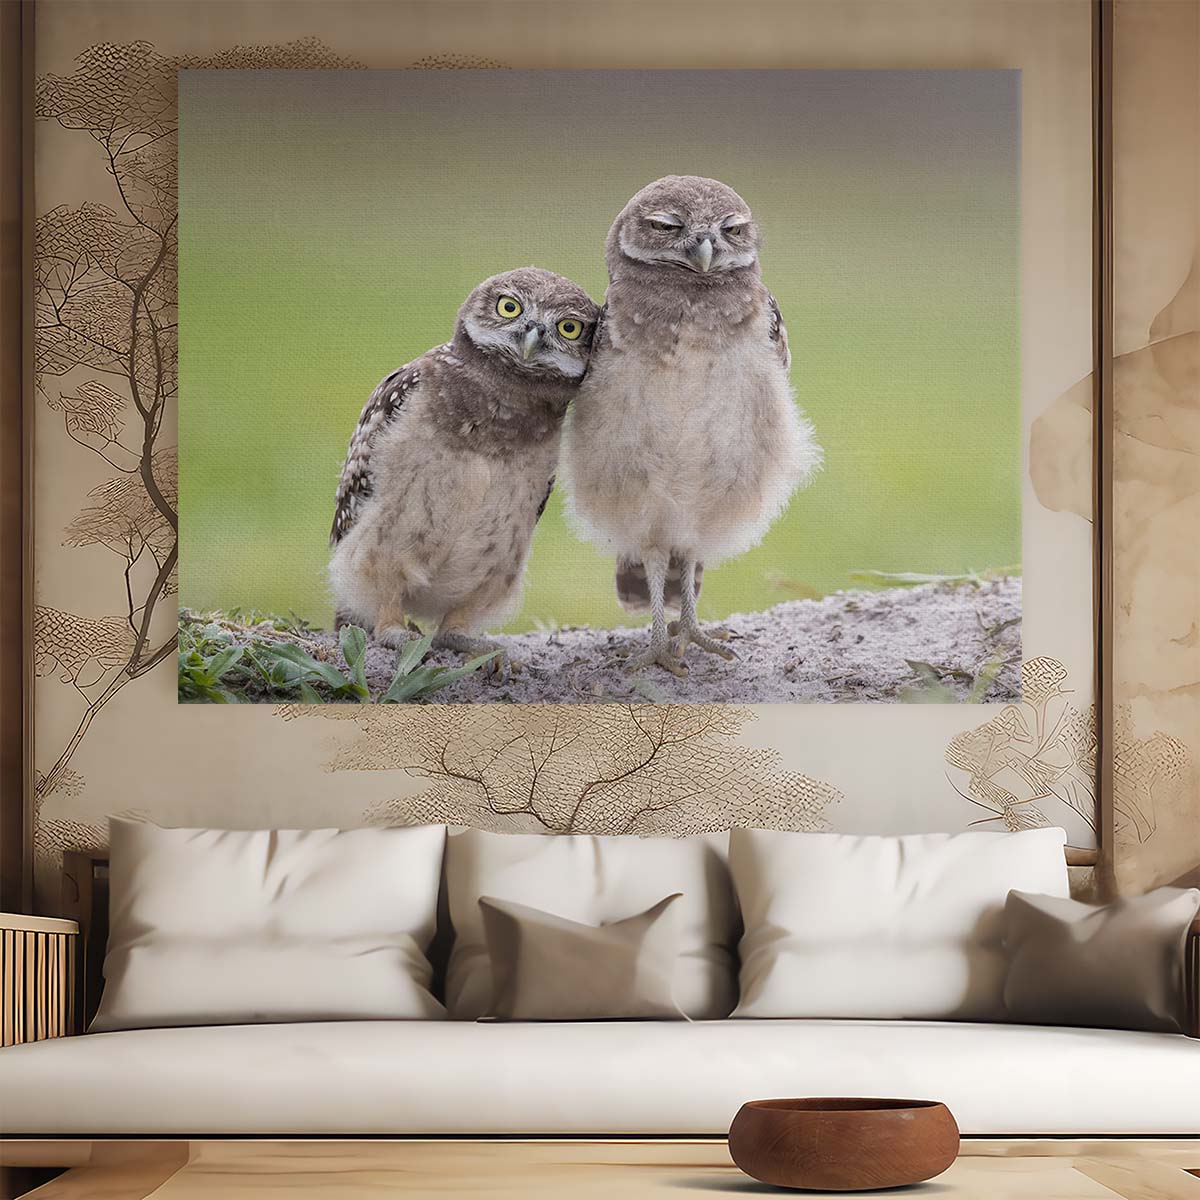 Adorable Owl Siblings Embrace Wildlife Wall Art by Luxuriance Designs. Made in USA.